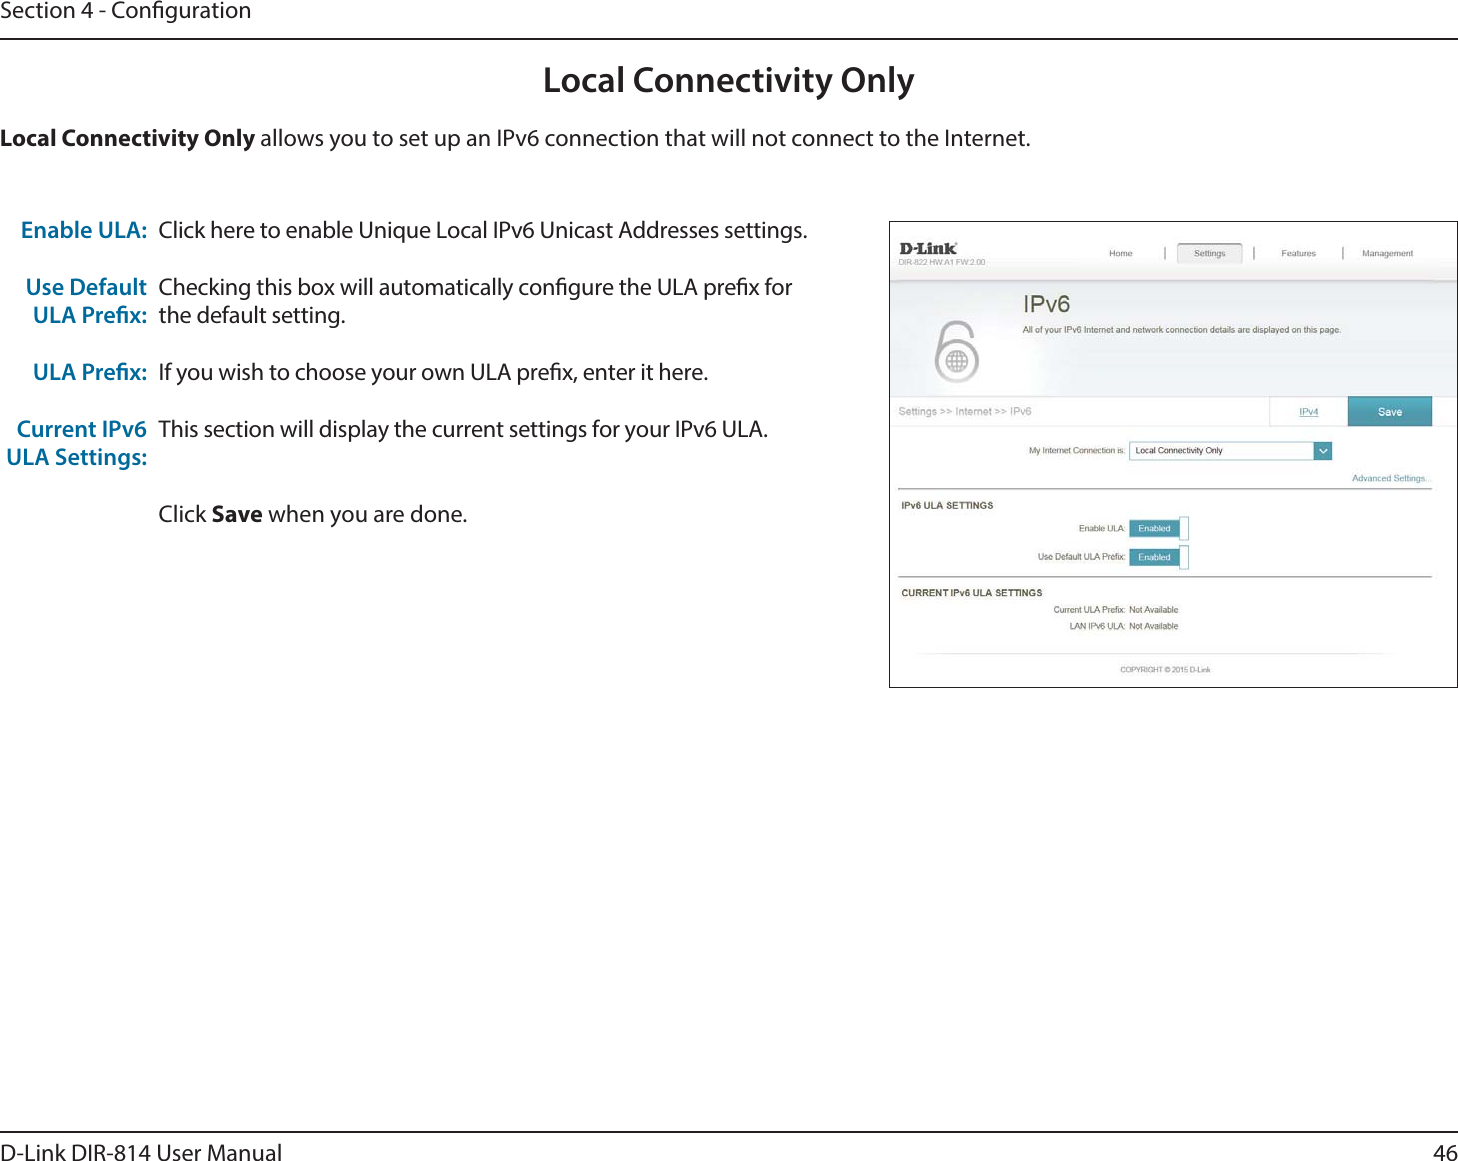 46D-Link DIR-814 User ManualSection 4 - CongurationLocal Connectivity OnlyClick here to enable Unique Local IPv6 Unicast Addresses settings.Checking this box will automatically congure the ULA prex for the default setting.If you wish to choose your own ULA prex, enter it here.This section will display the current settings for your IPv6 ULA.Click Save when you are done.Enable ULA:Use Default ULA Prex:ULA Prex:Current IPv6 ULA Settings:Local Connectivity Only allows you to set up an IPv6 connection that will not connect to the Internet.